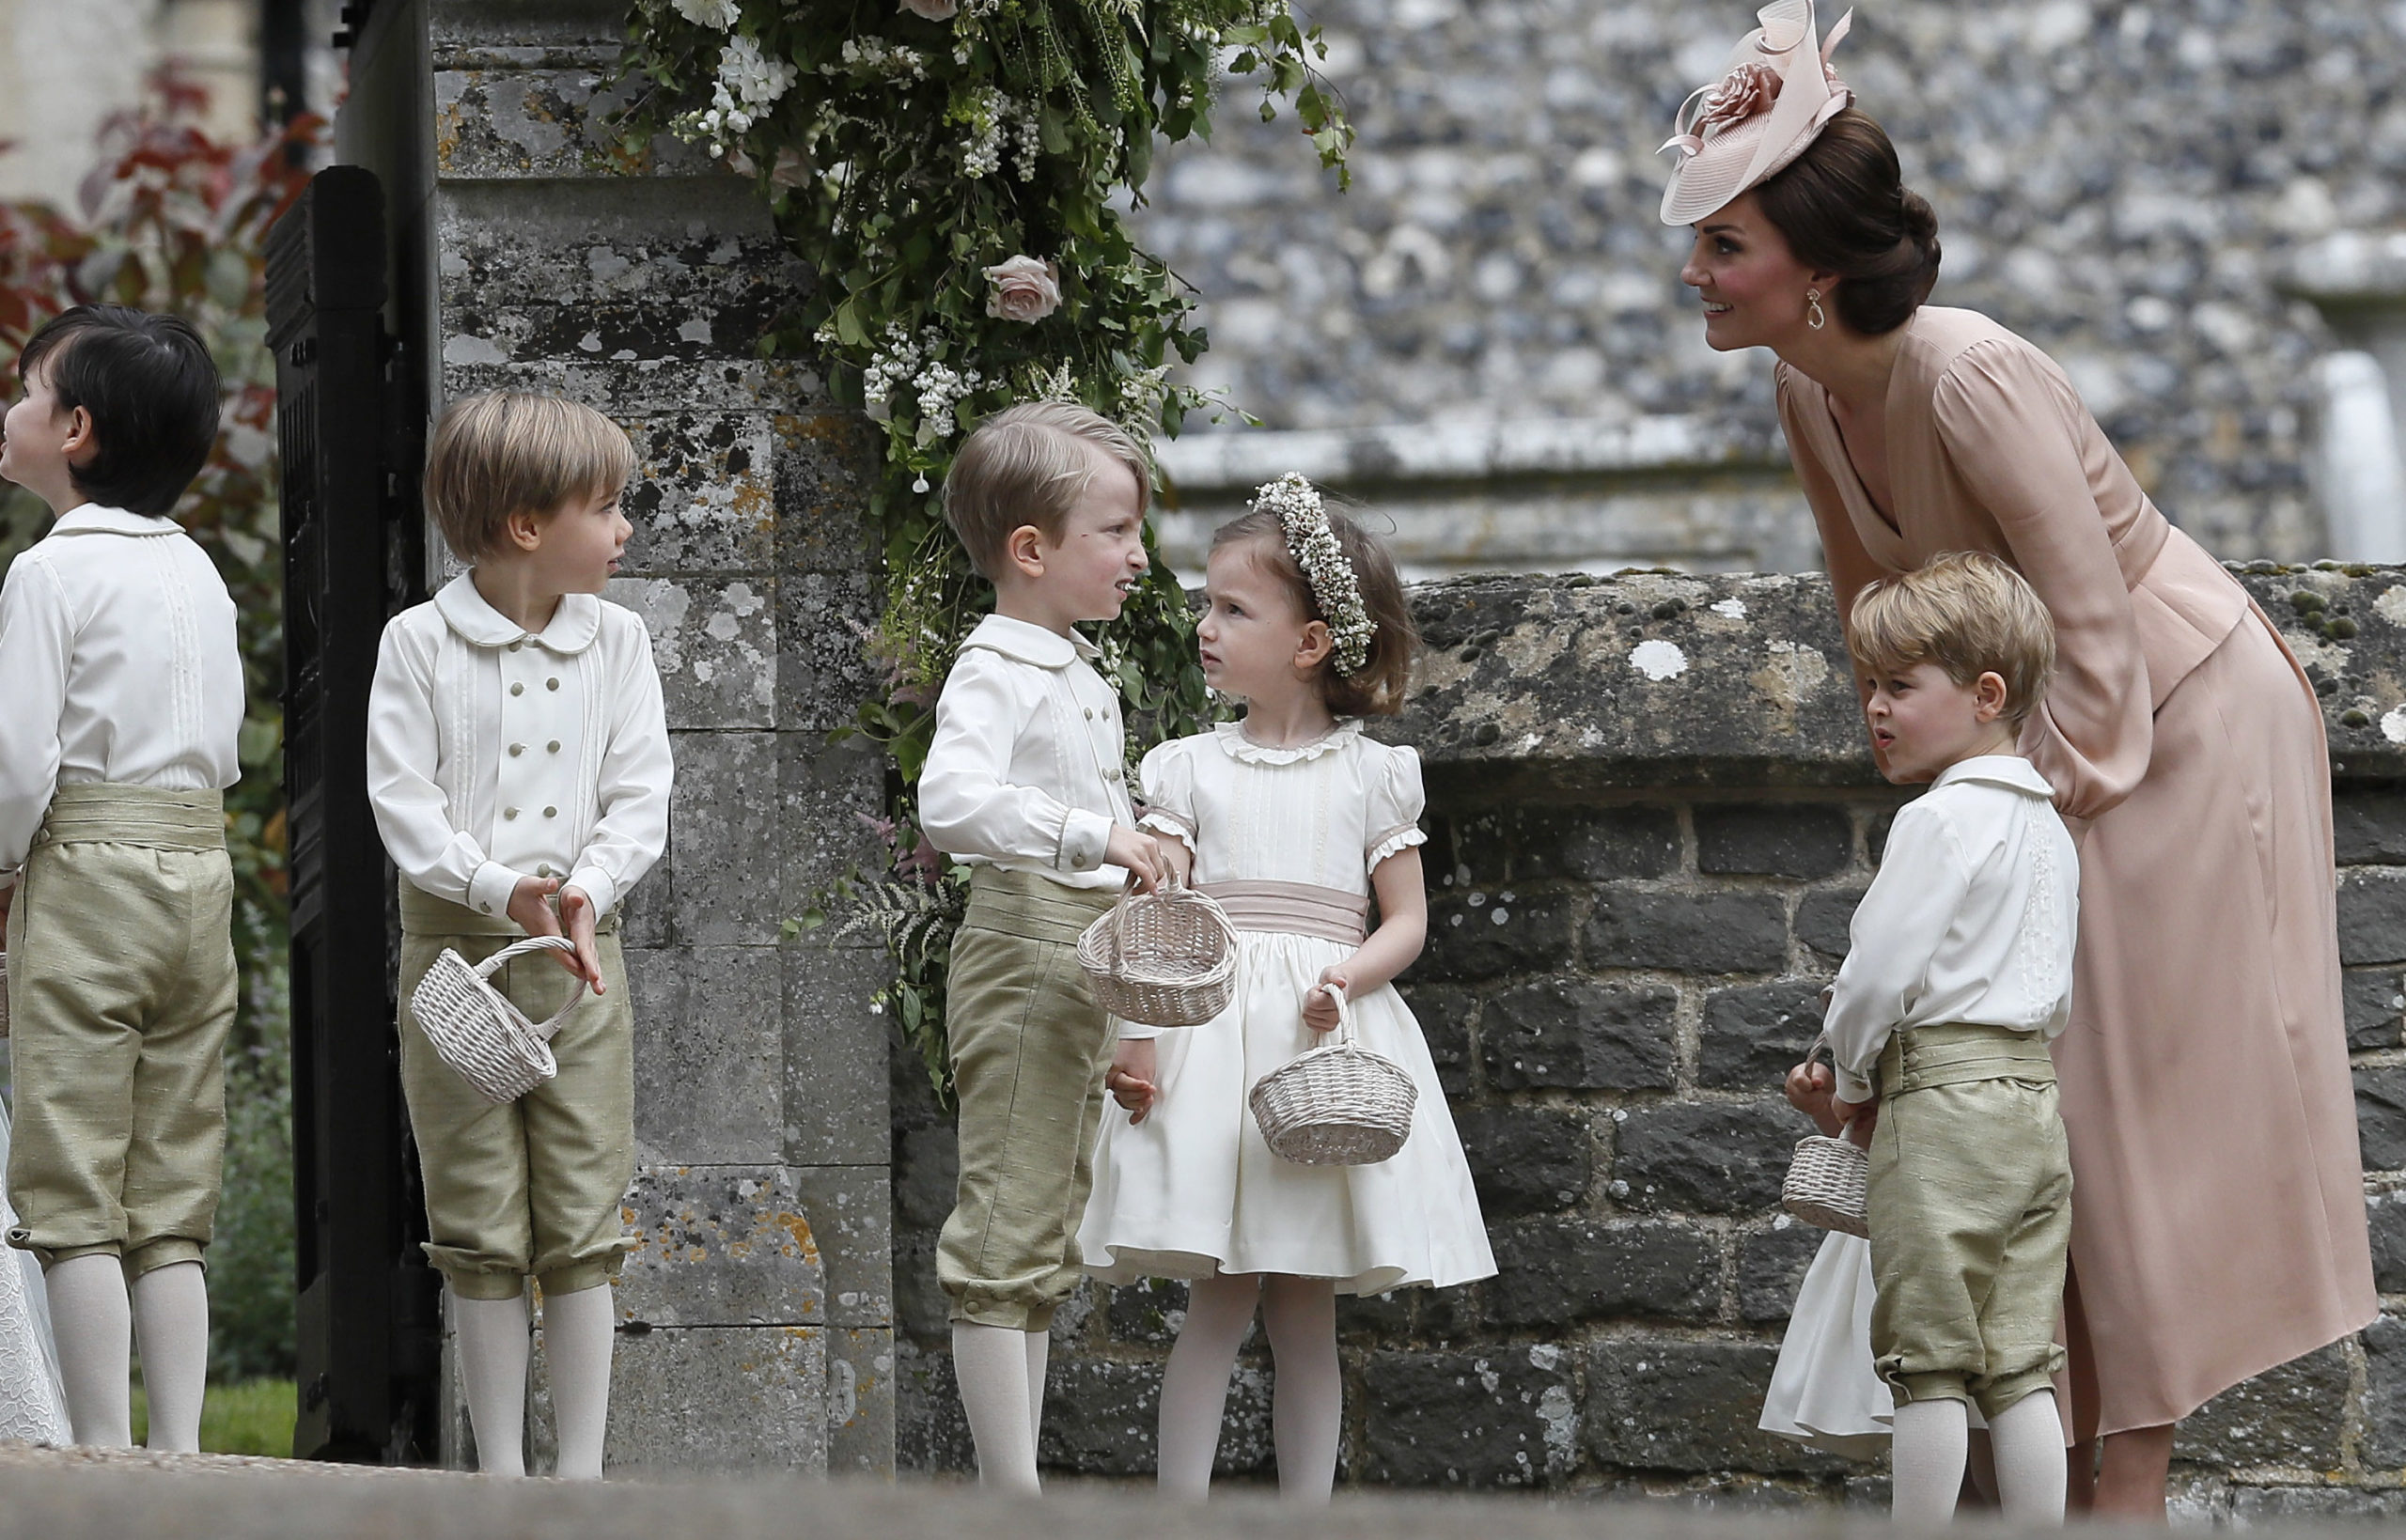 How to dress your child like a royal